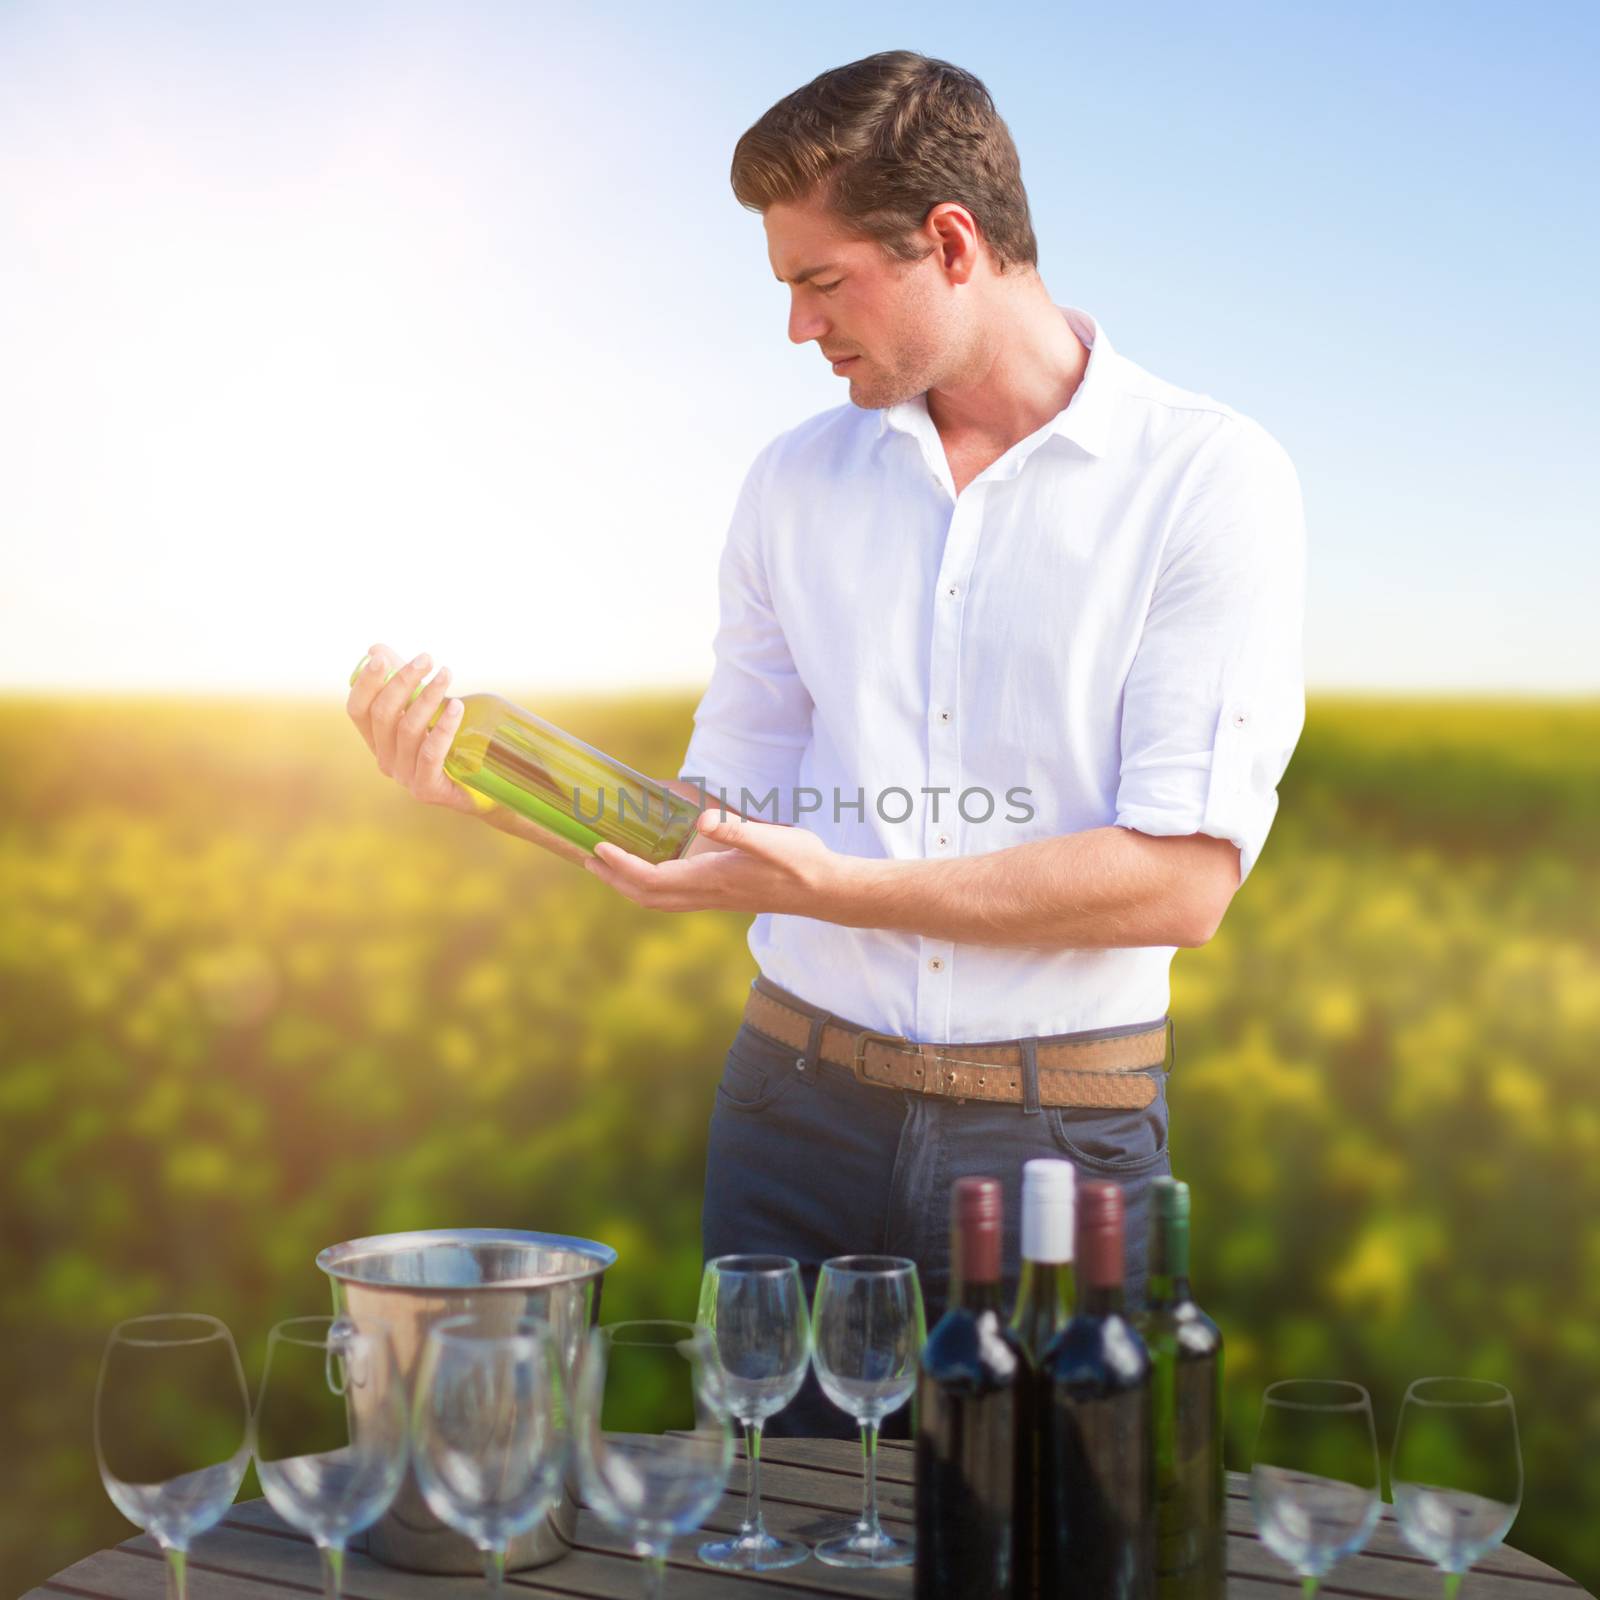 Young man holding wine bottle by glasses on barrel against scenic view of beautiful mustard field